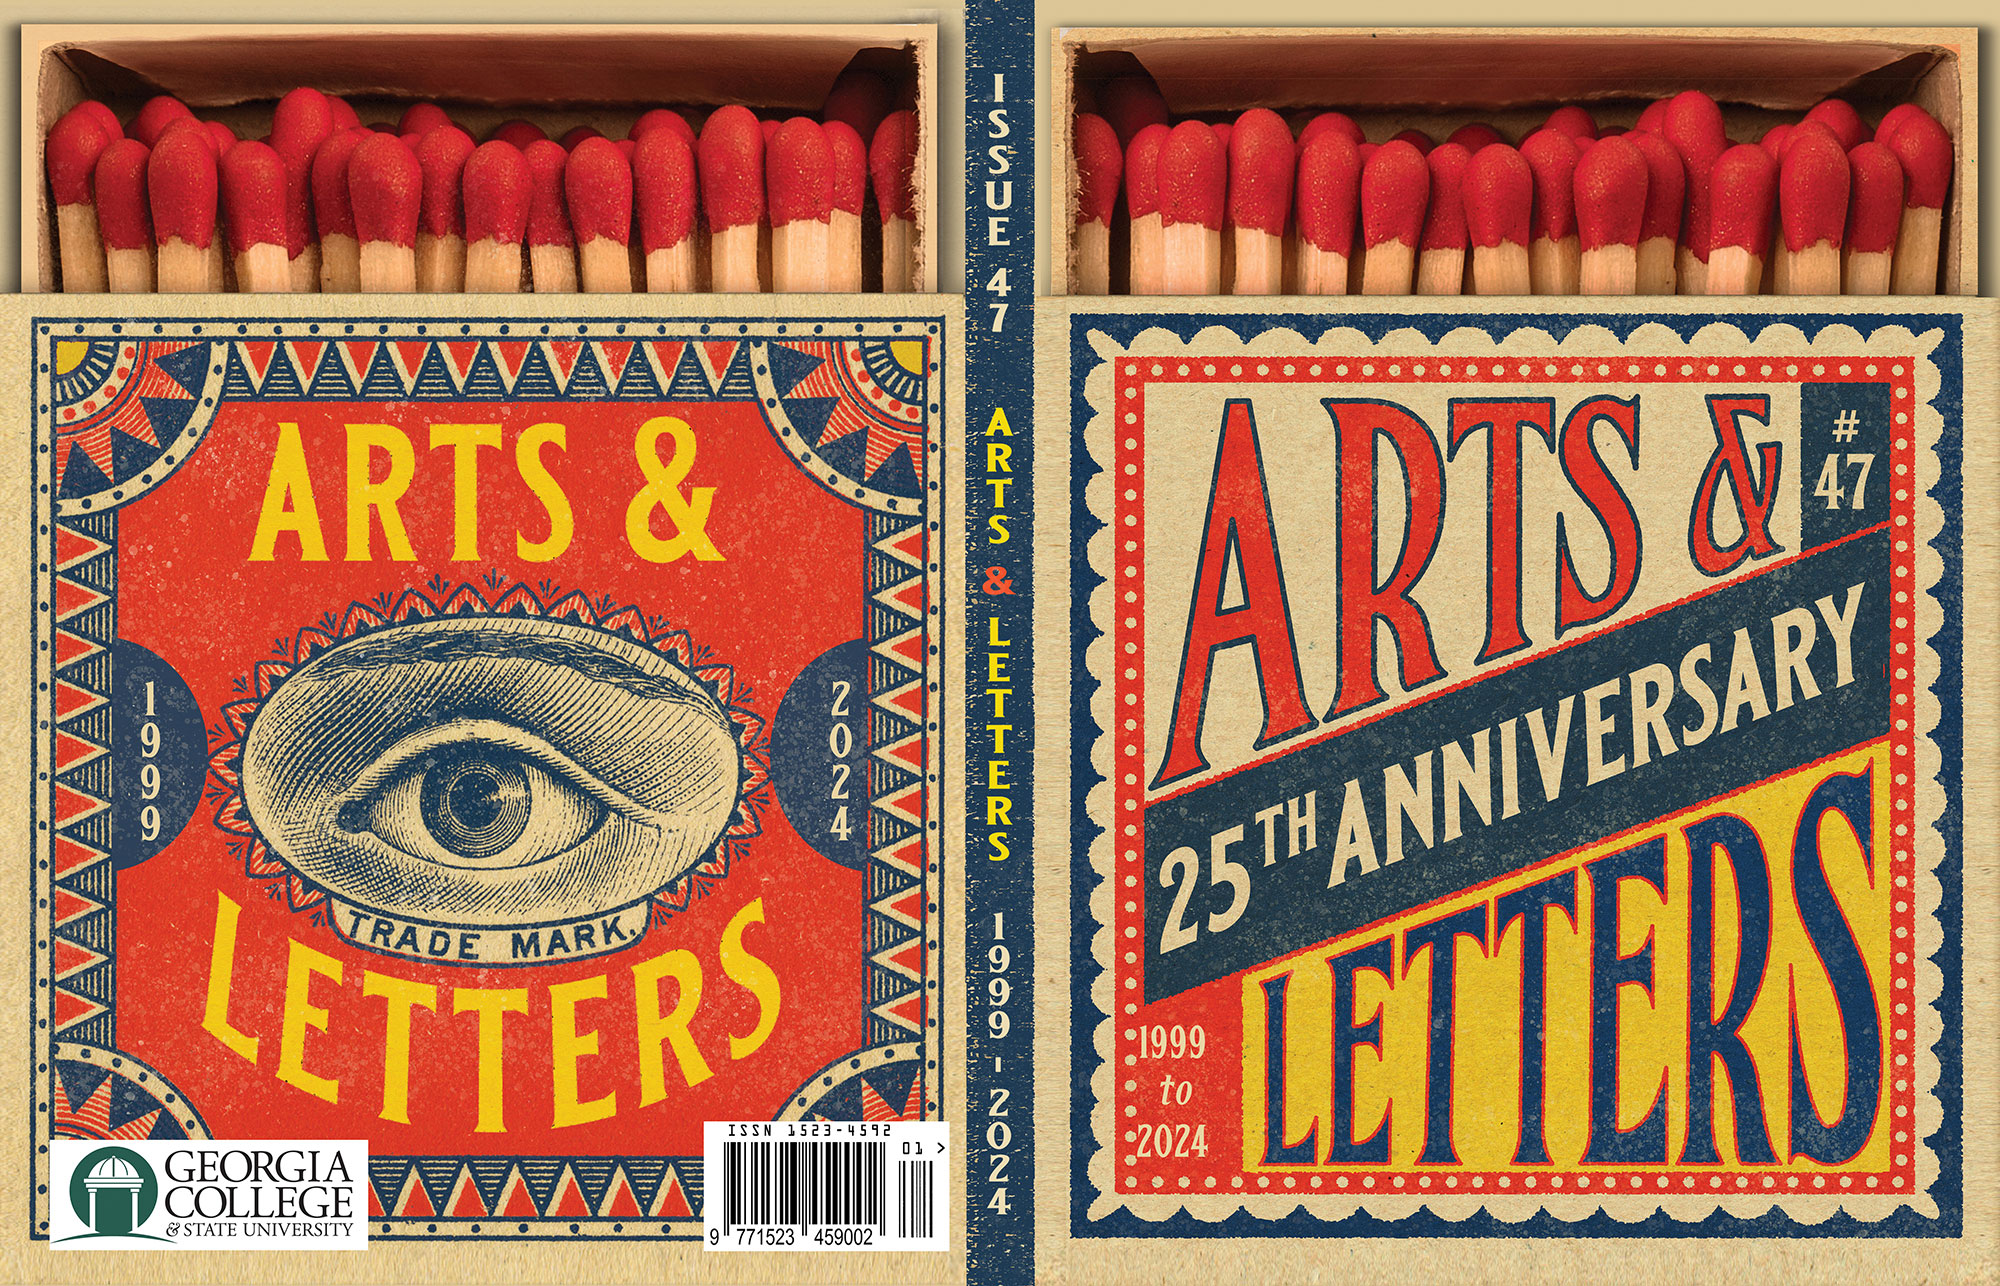 Arts & Letters, Issue 47